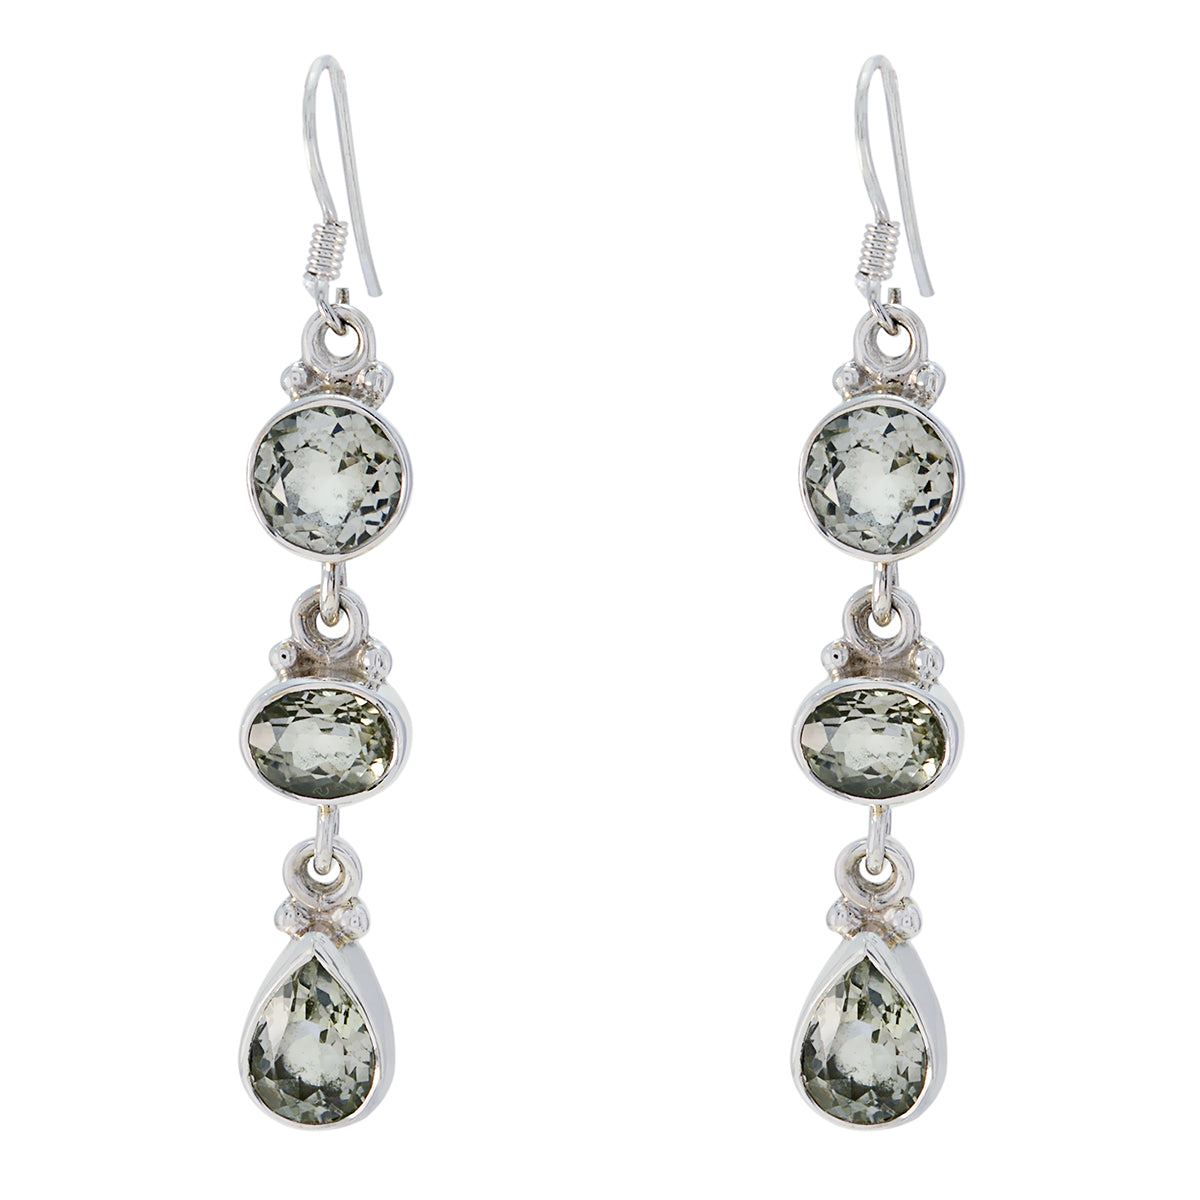 Riyo Natural Gemstone multi shape Faceted Green Amethyst Silver Earrings boxing day gift